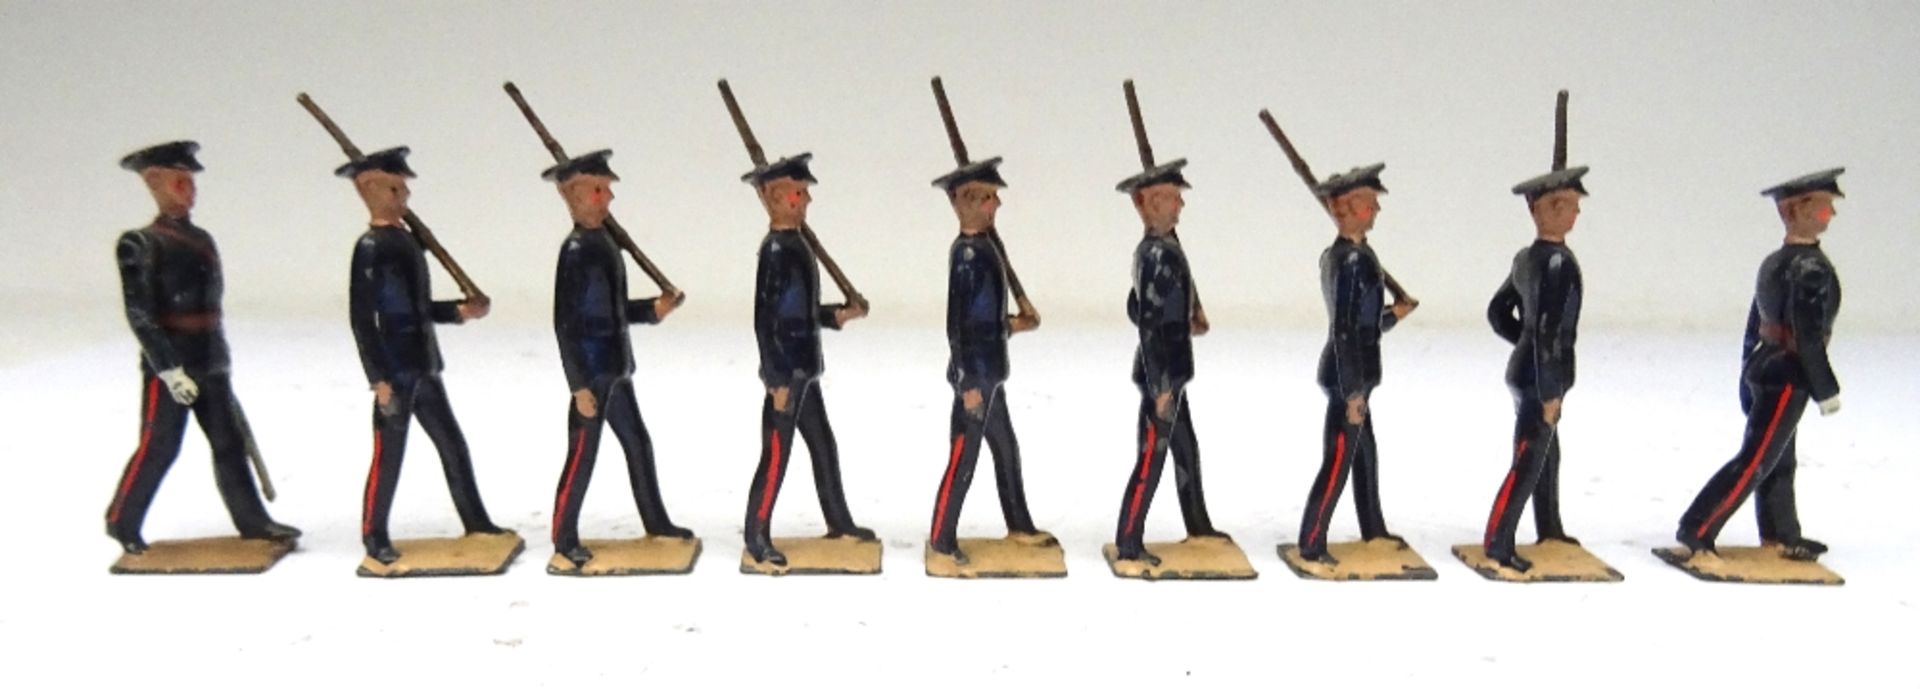 Britains set 1537, Territorials at the slope, blue uniforms - Image 5 of 5